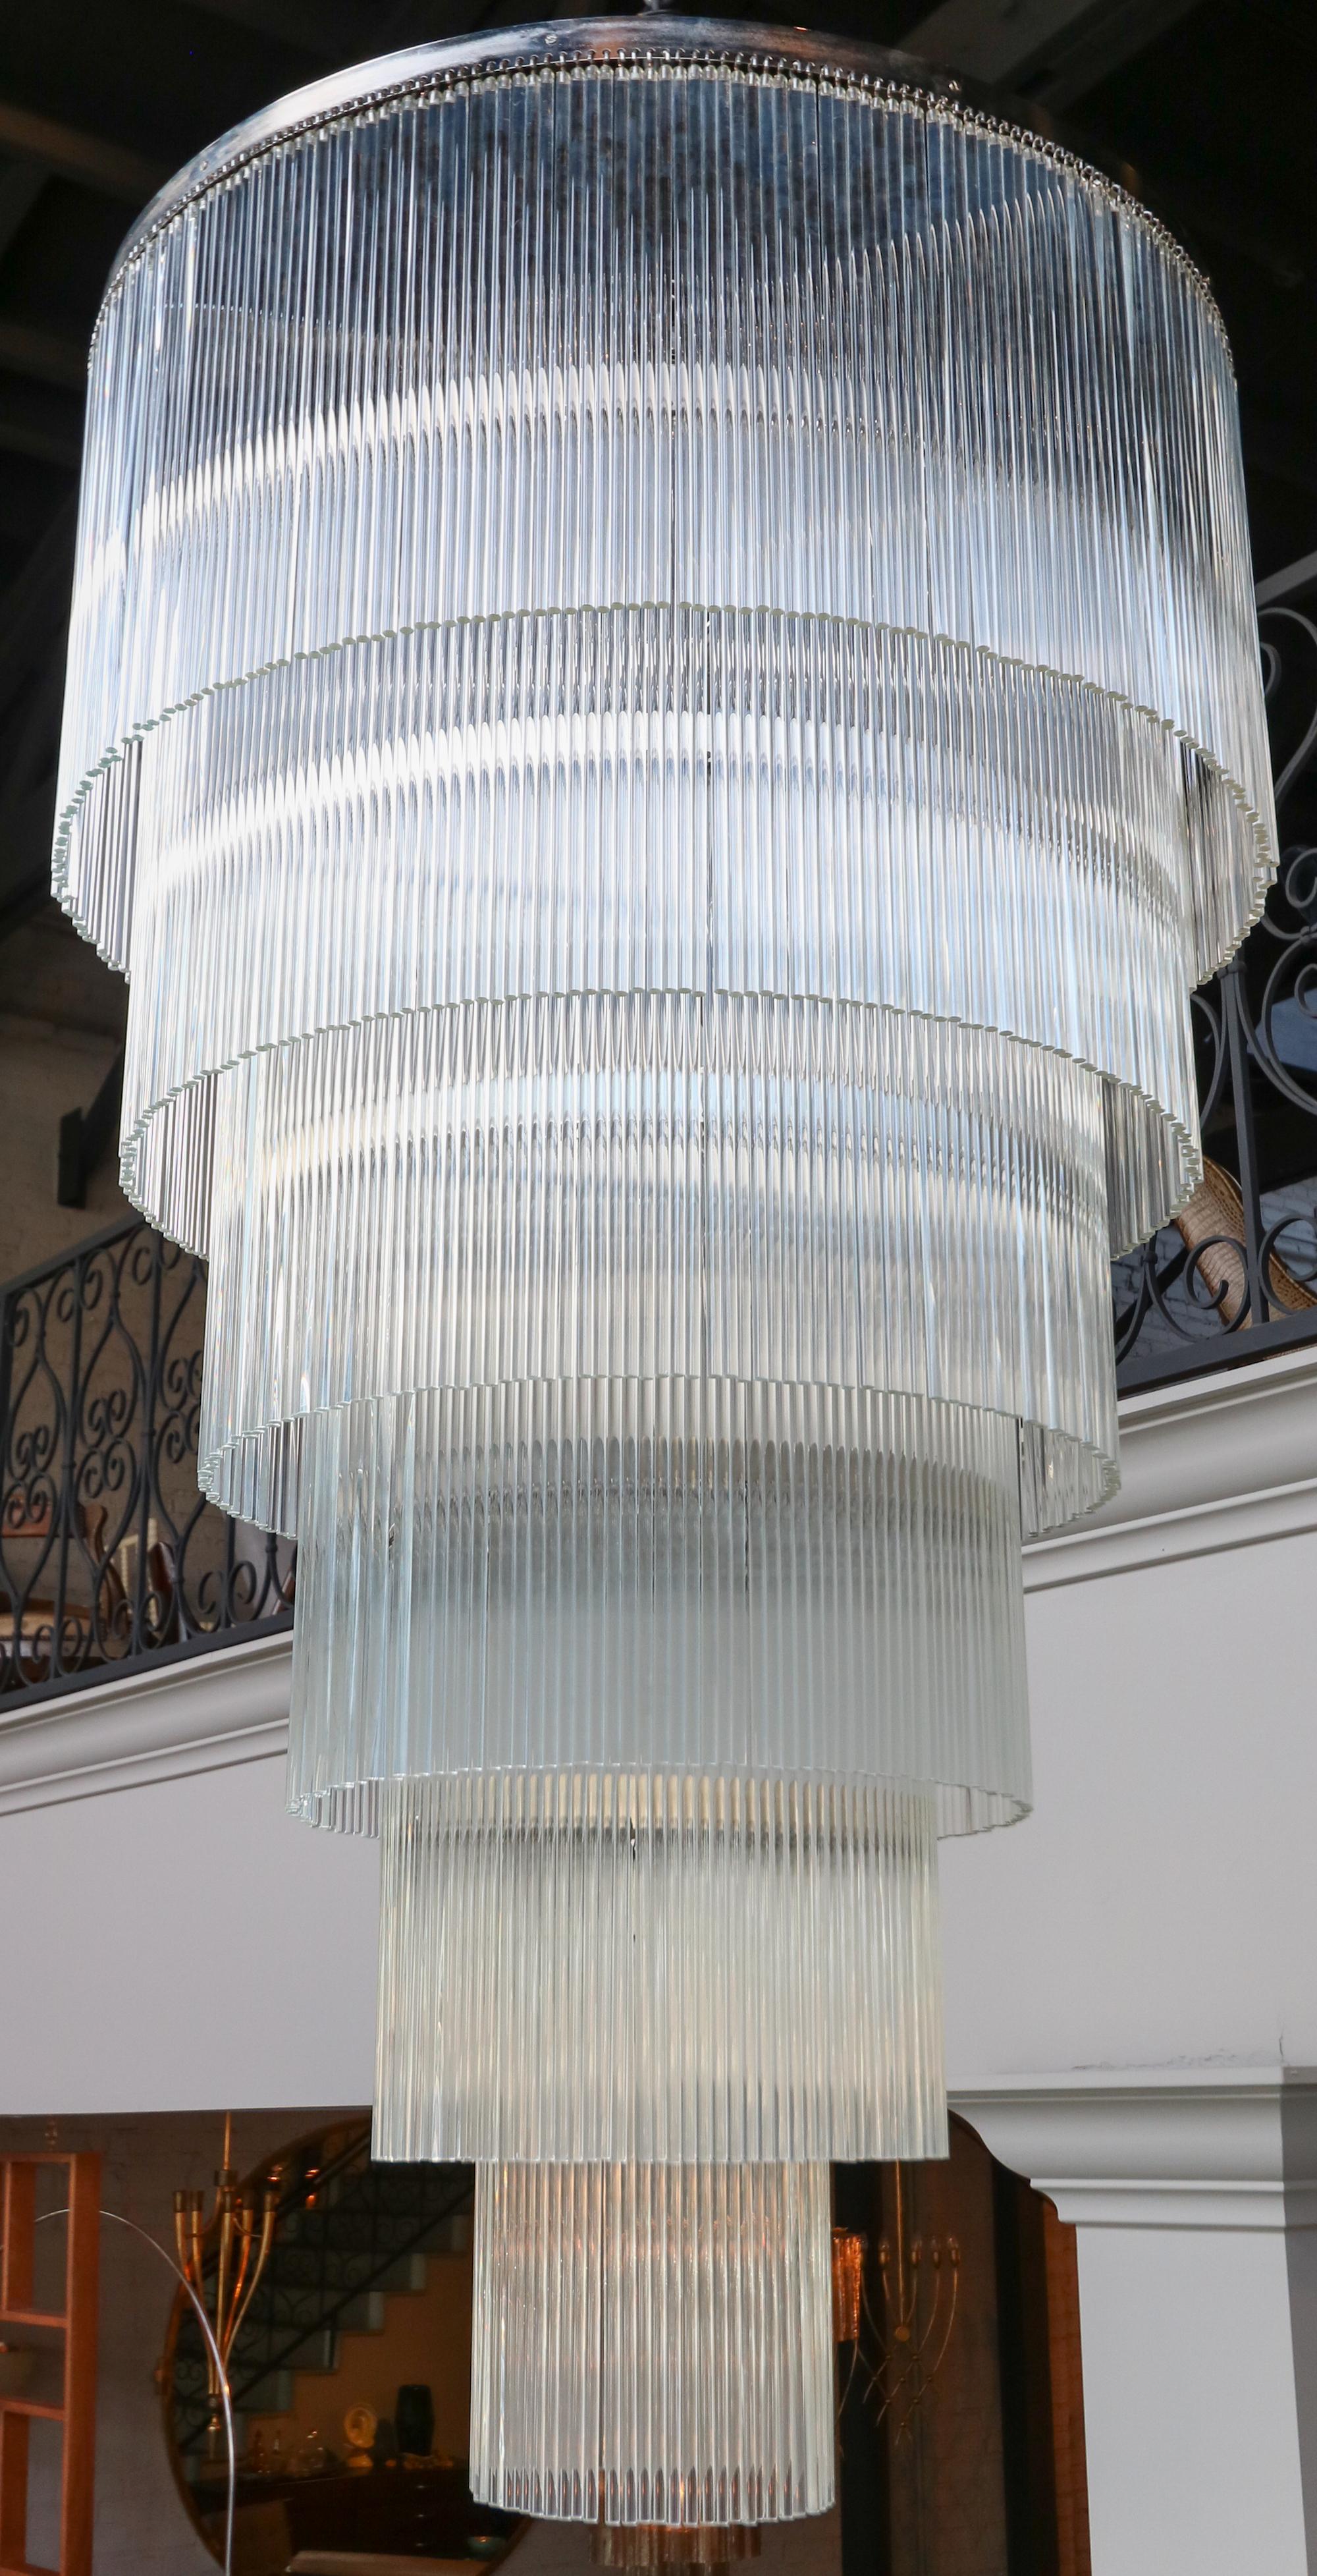 Long chandelier with six tiers with over a thousand glass rods on a chrome frame.